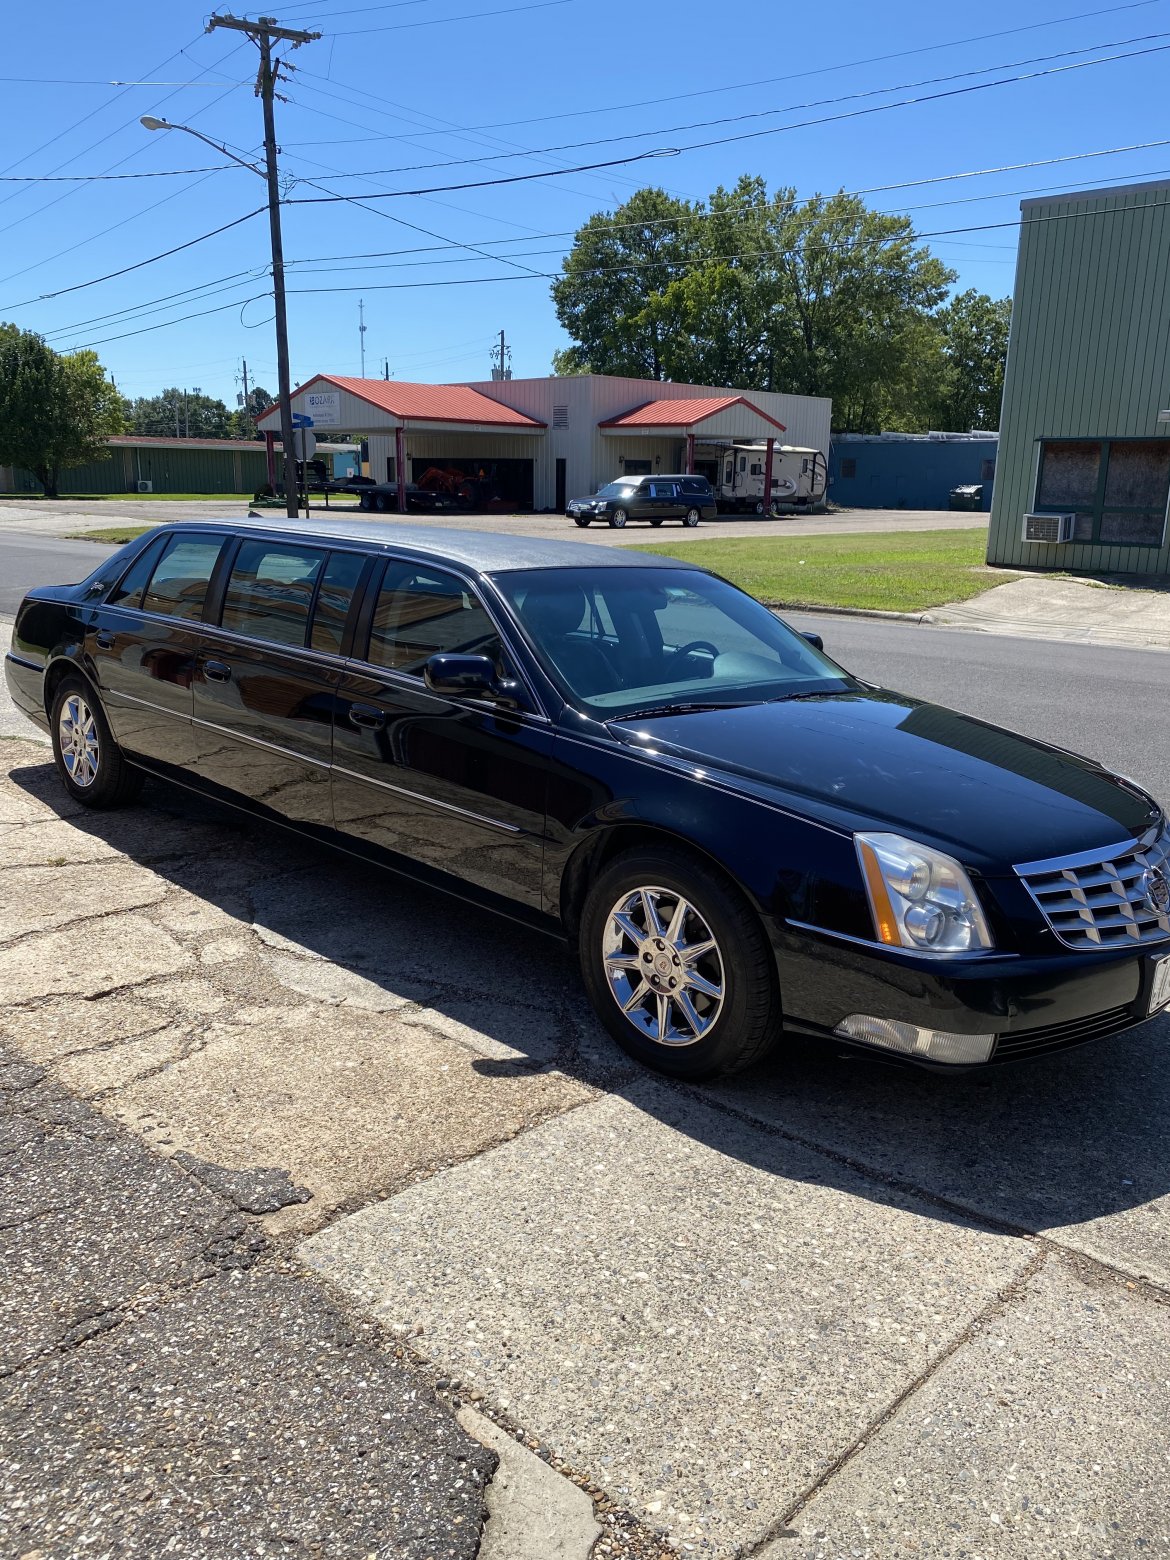 Limousine for sale: 2011 Cadillac DTS